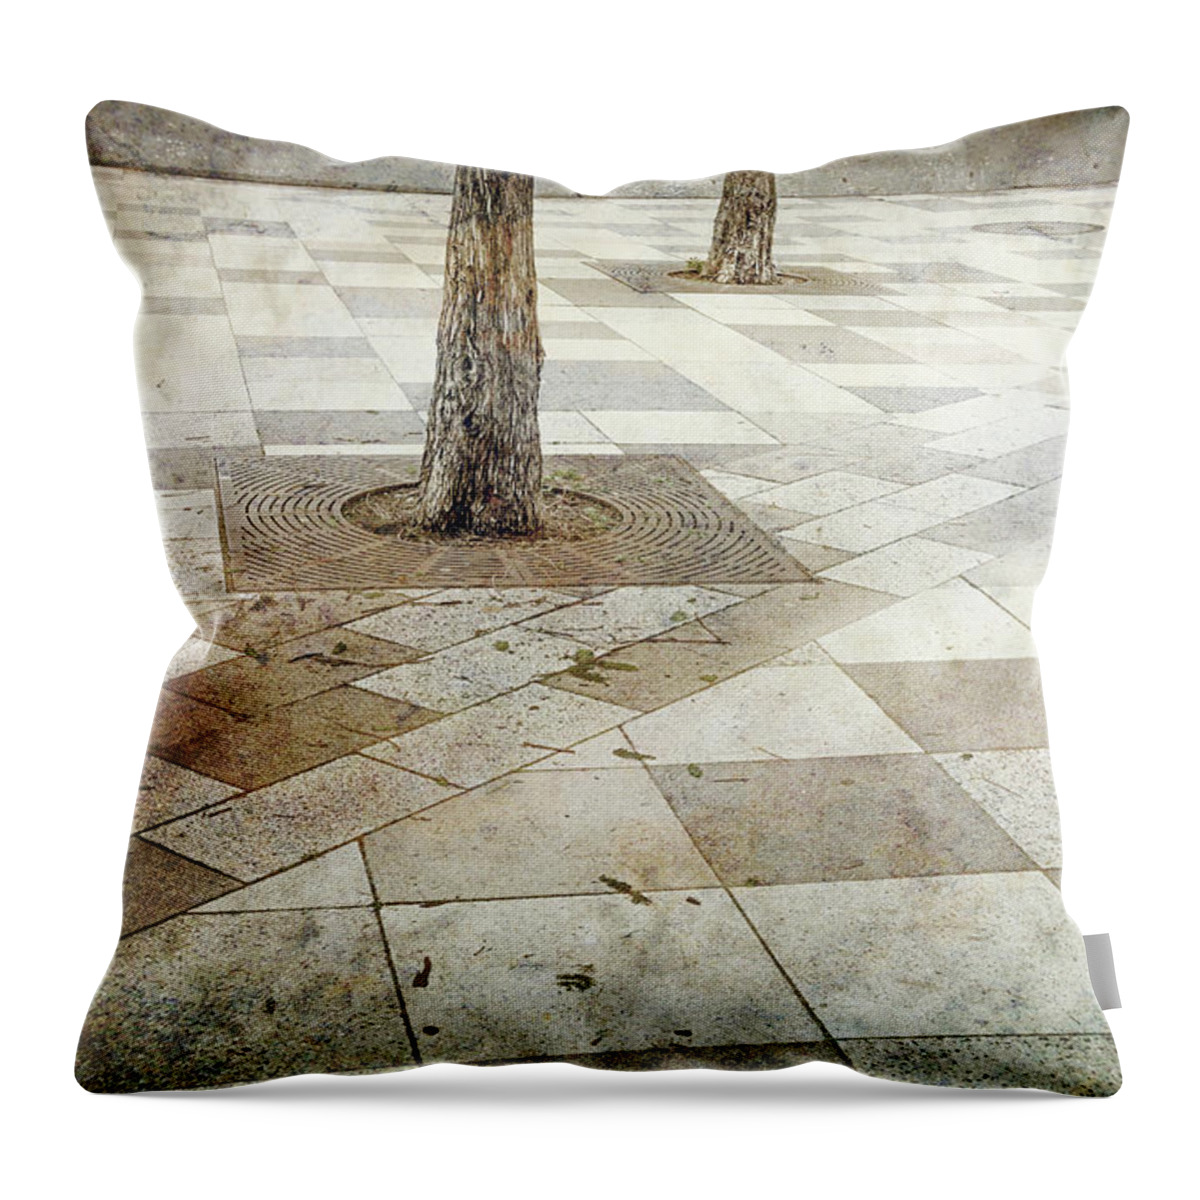 New York Throw Pillow featuring the photograph Still by Mark Gomez